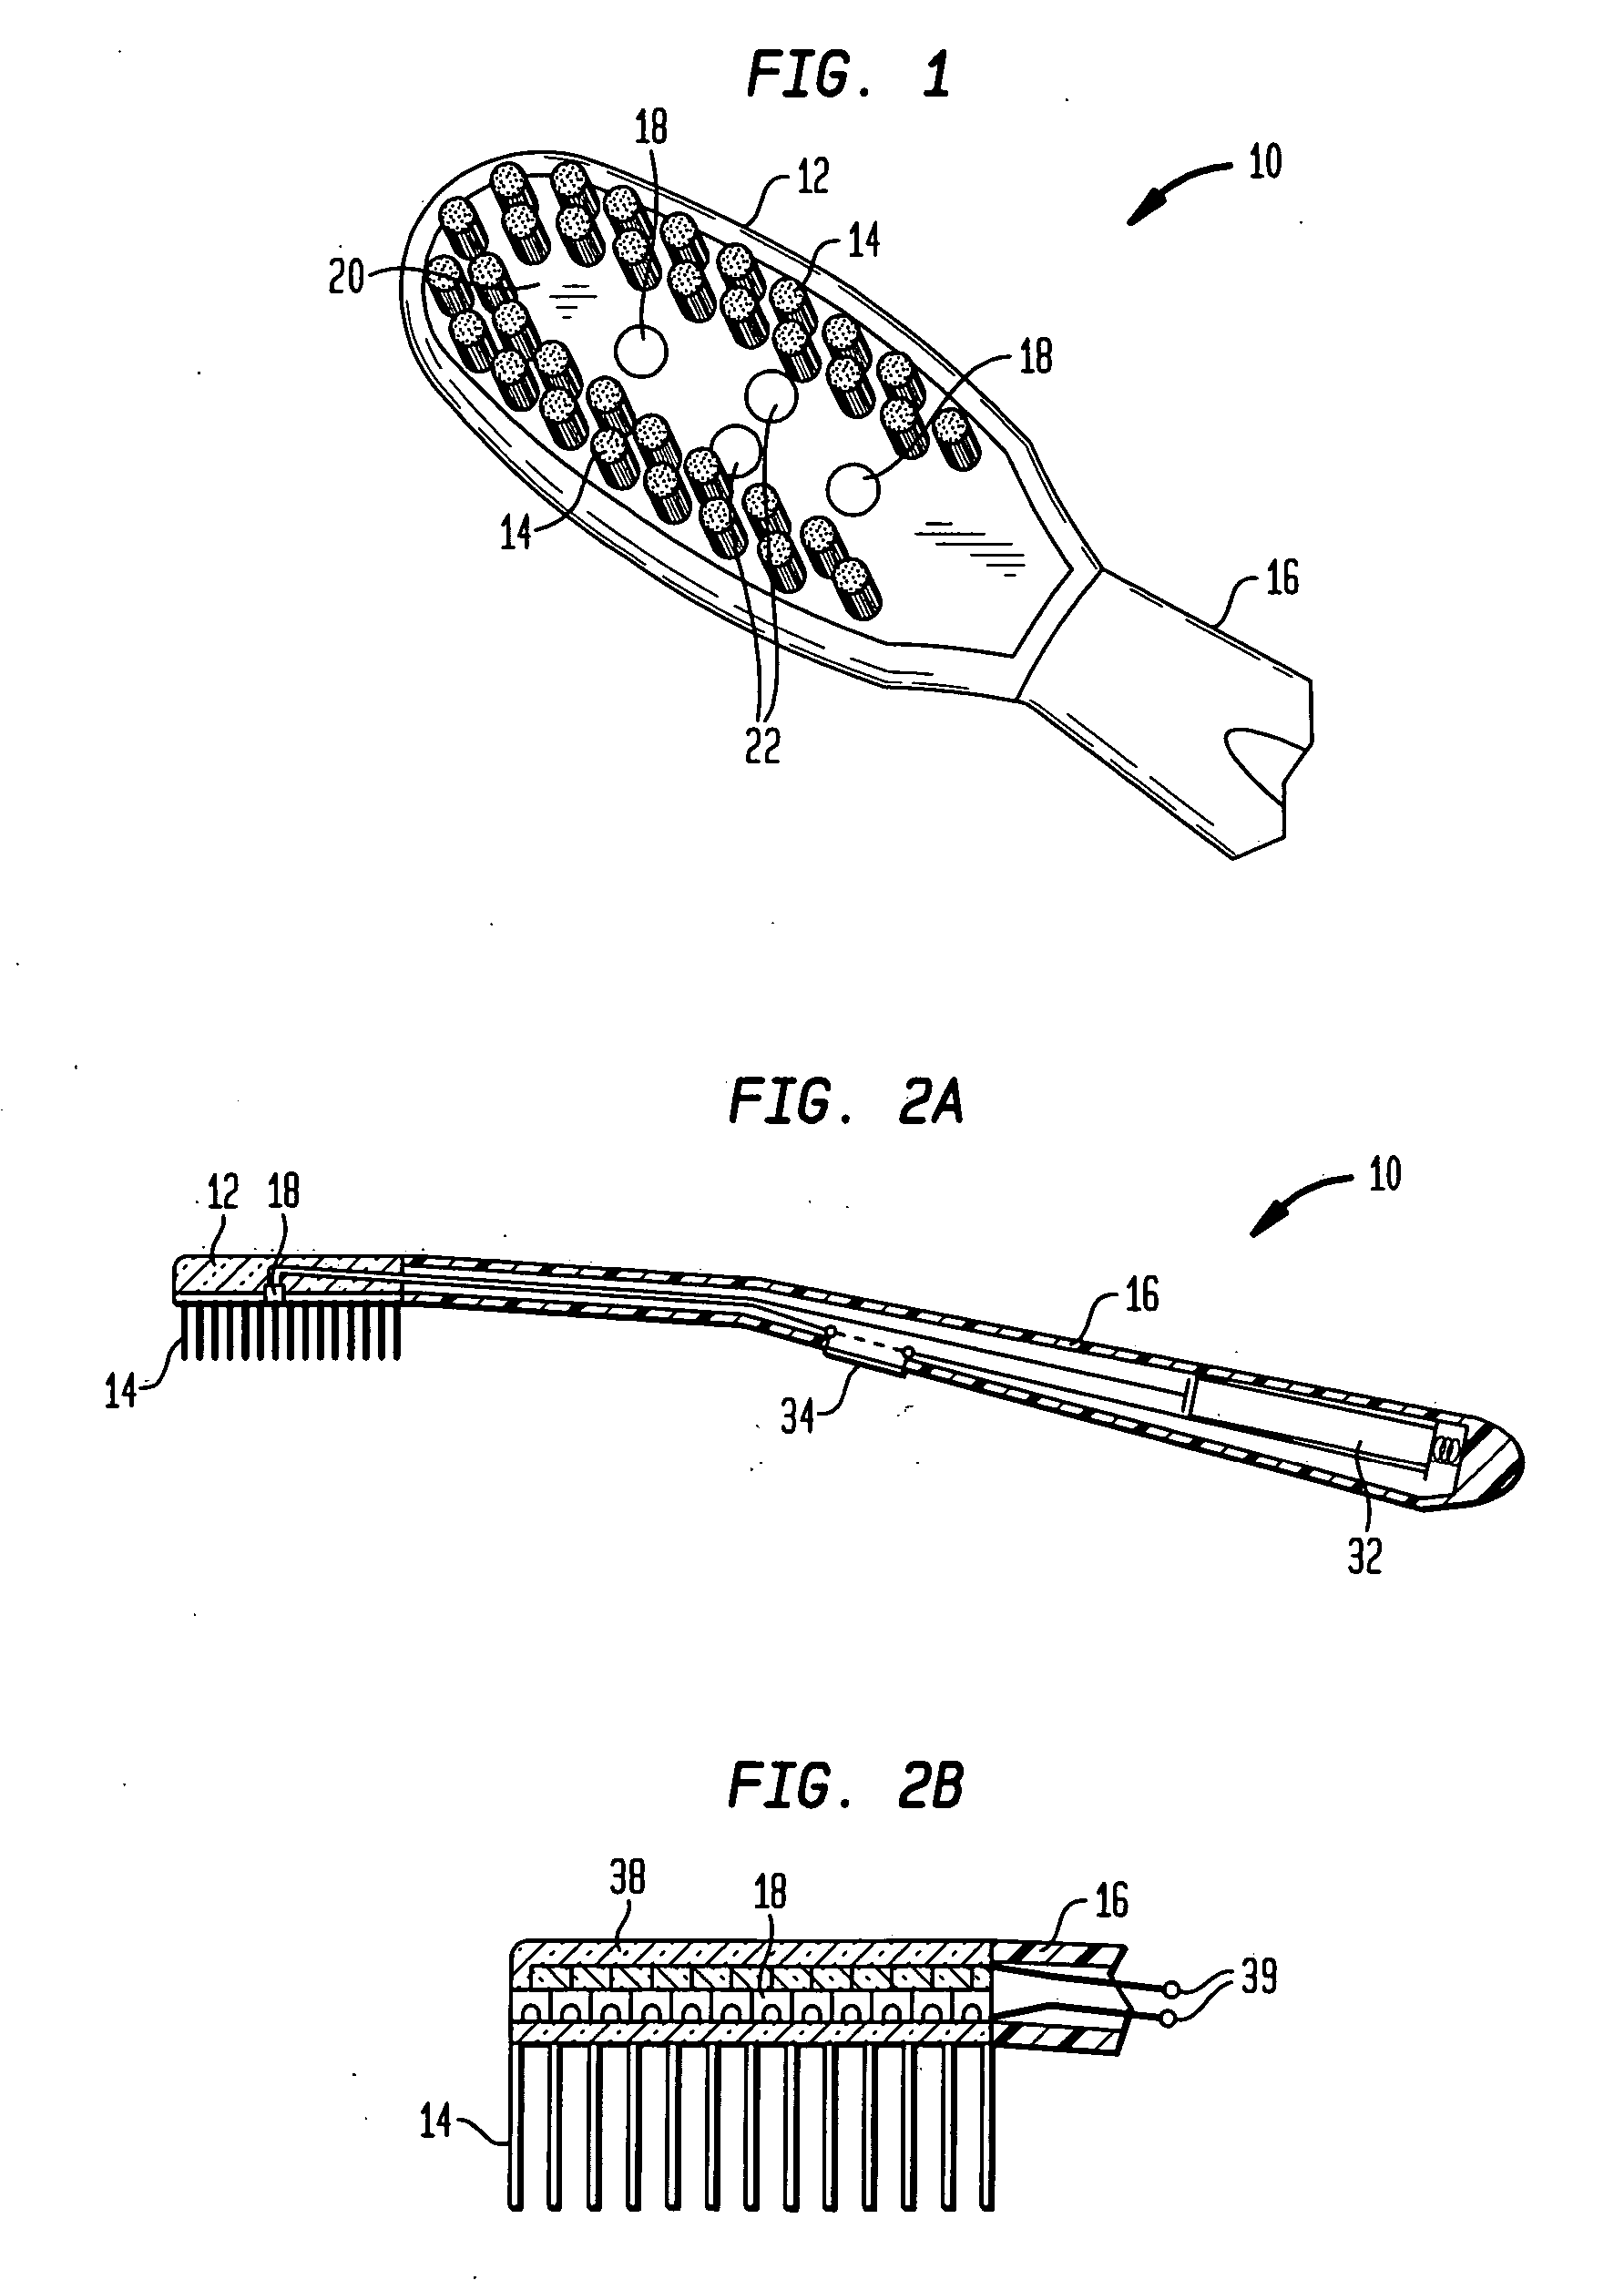 Tissue penetrating oral phototherapy applicator